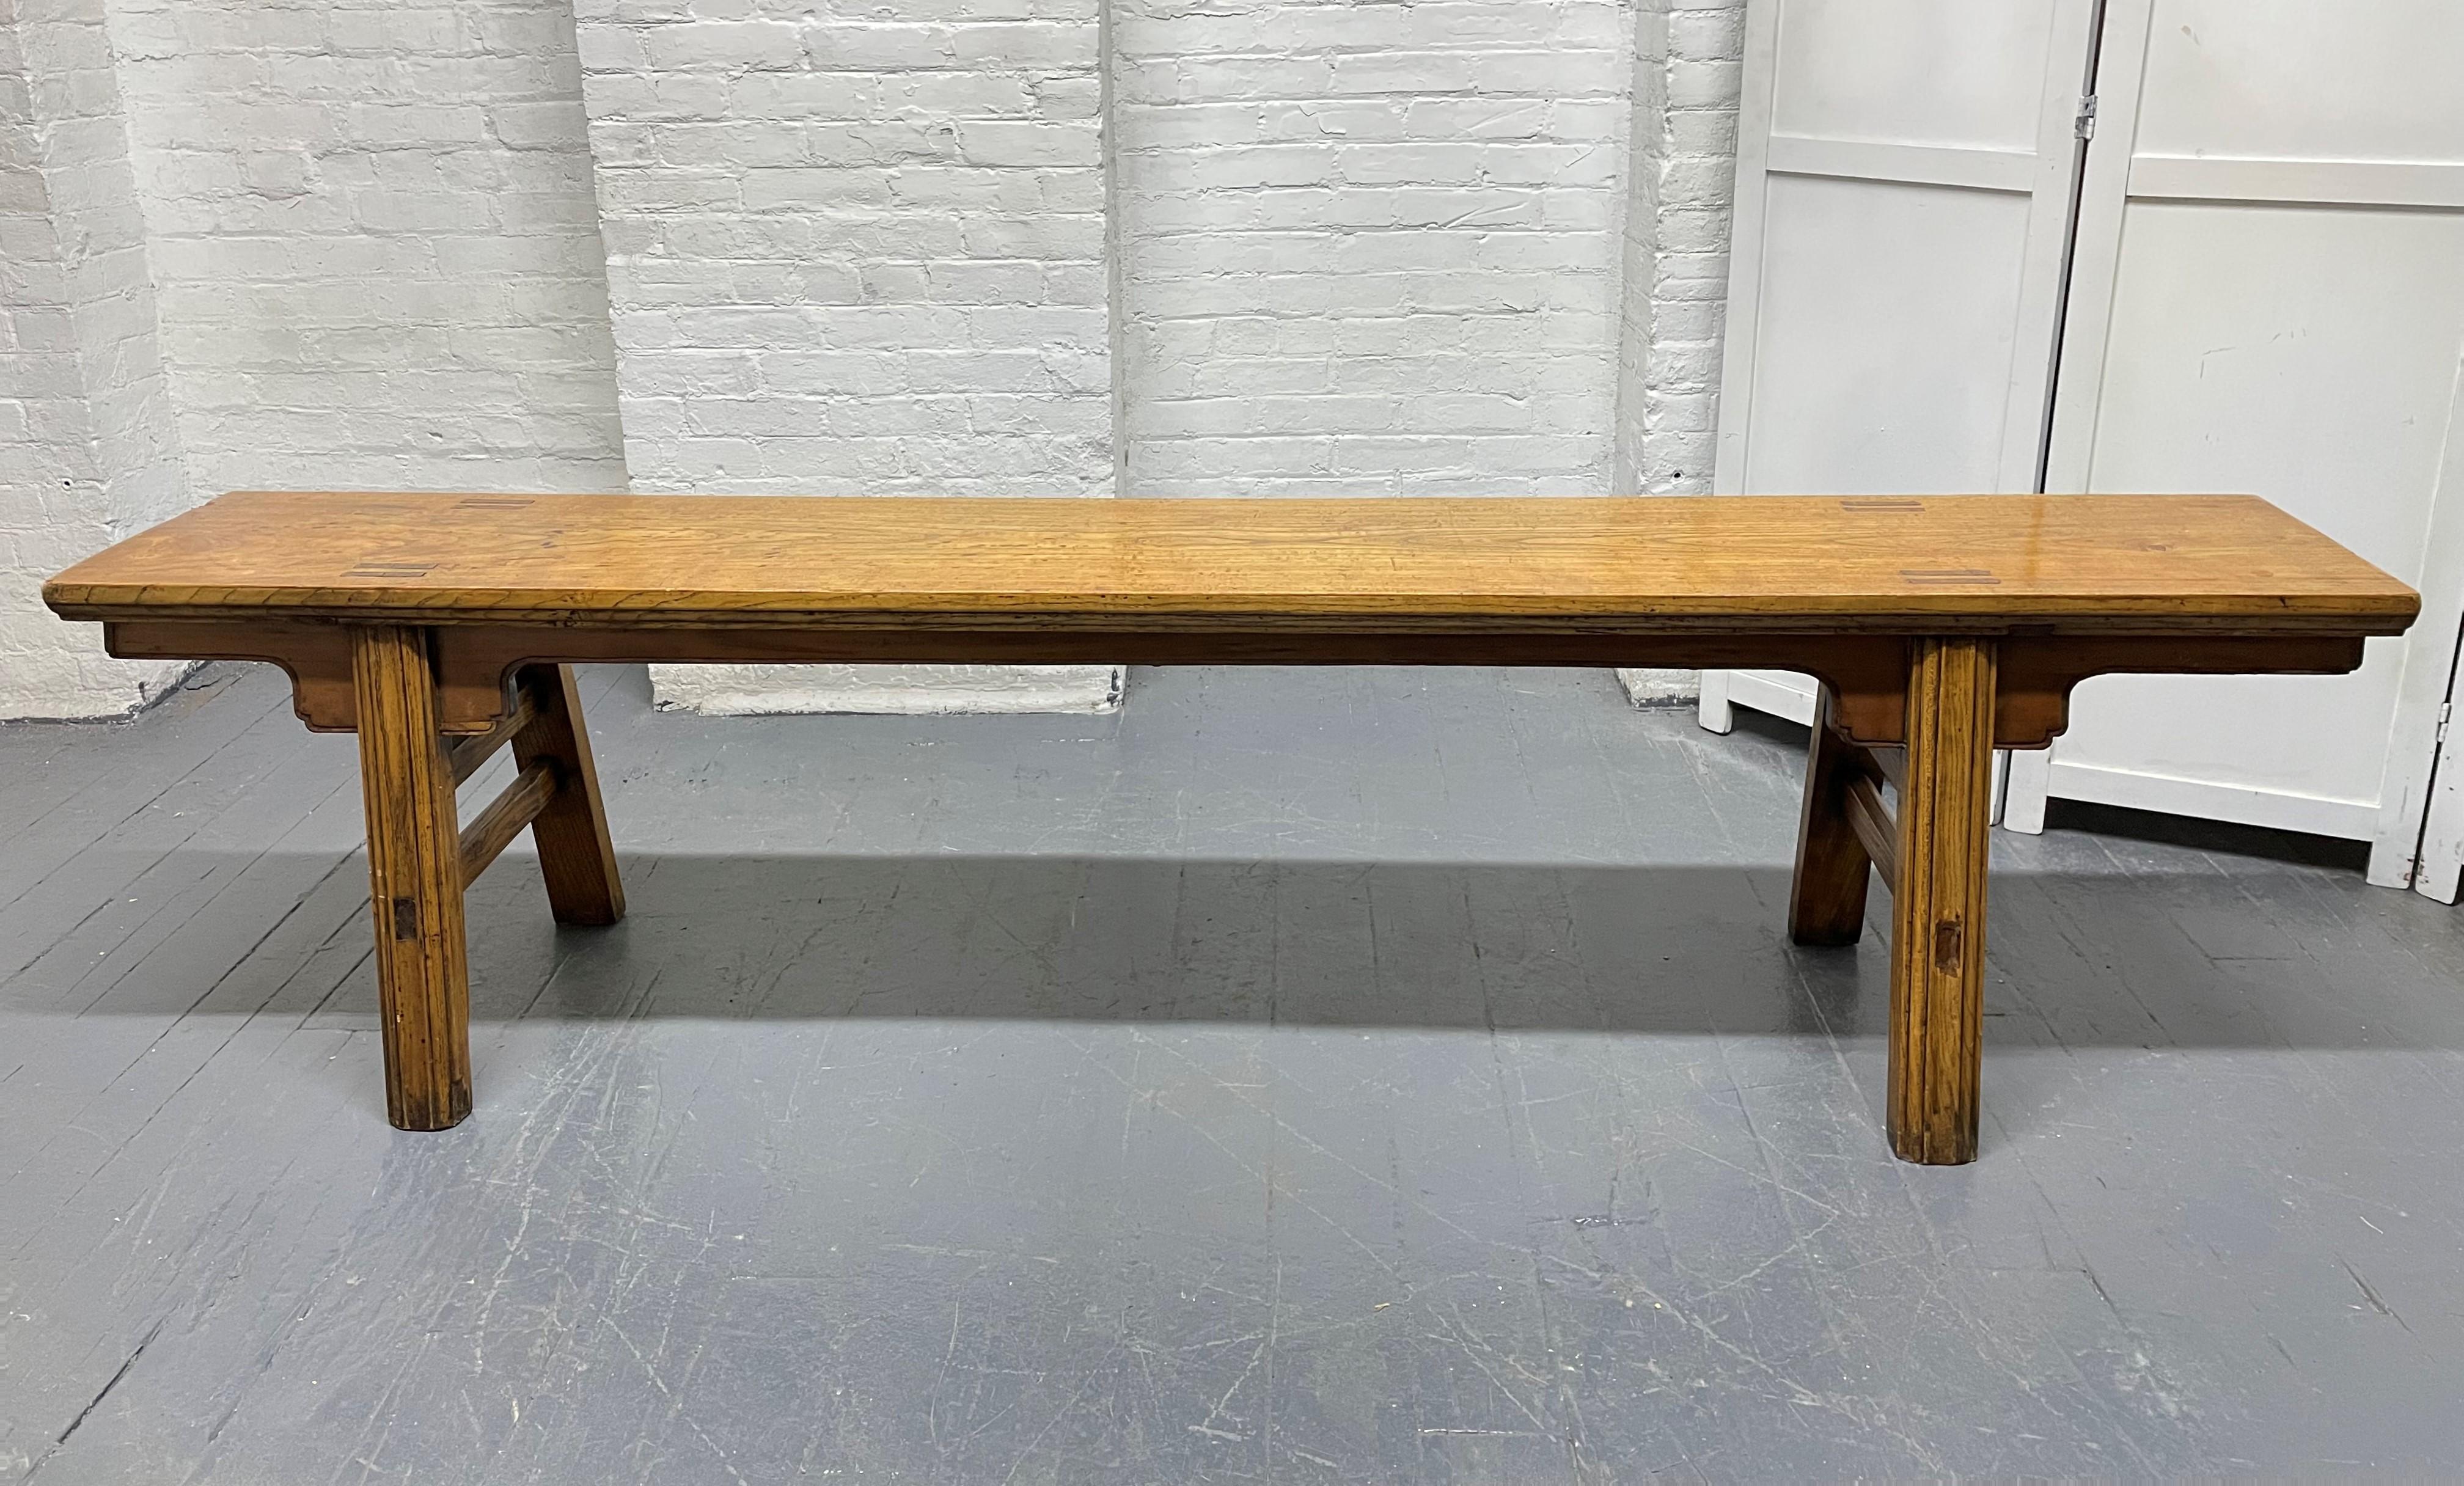 Pair of 19th century long elmwood Asian benches. Measures: 84